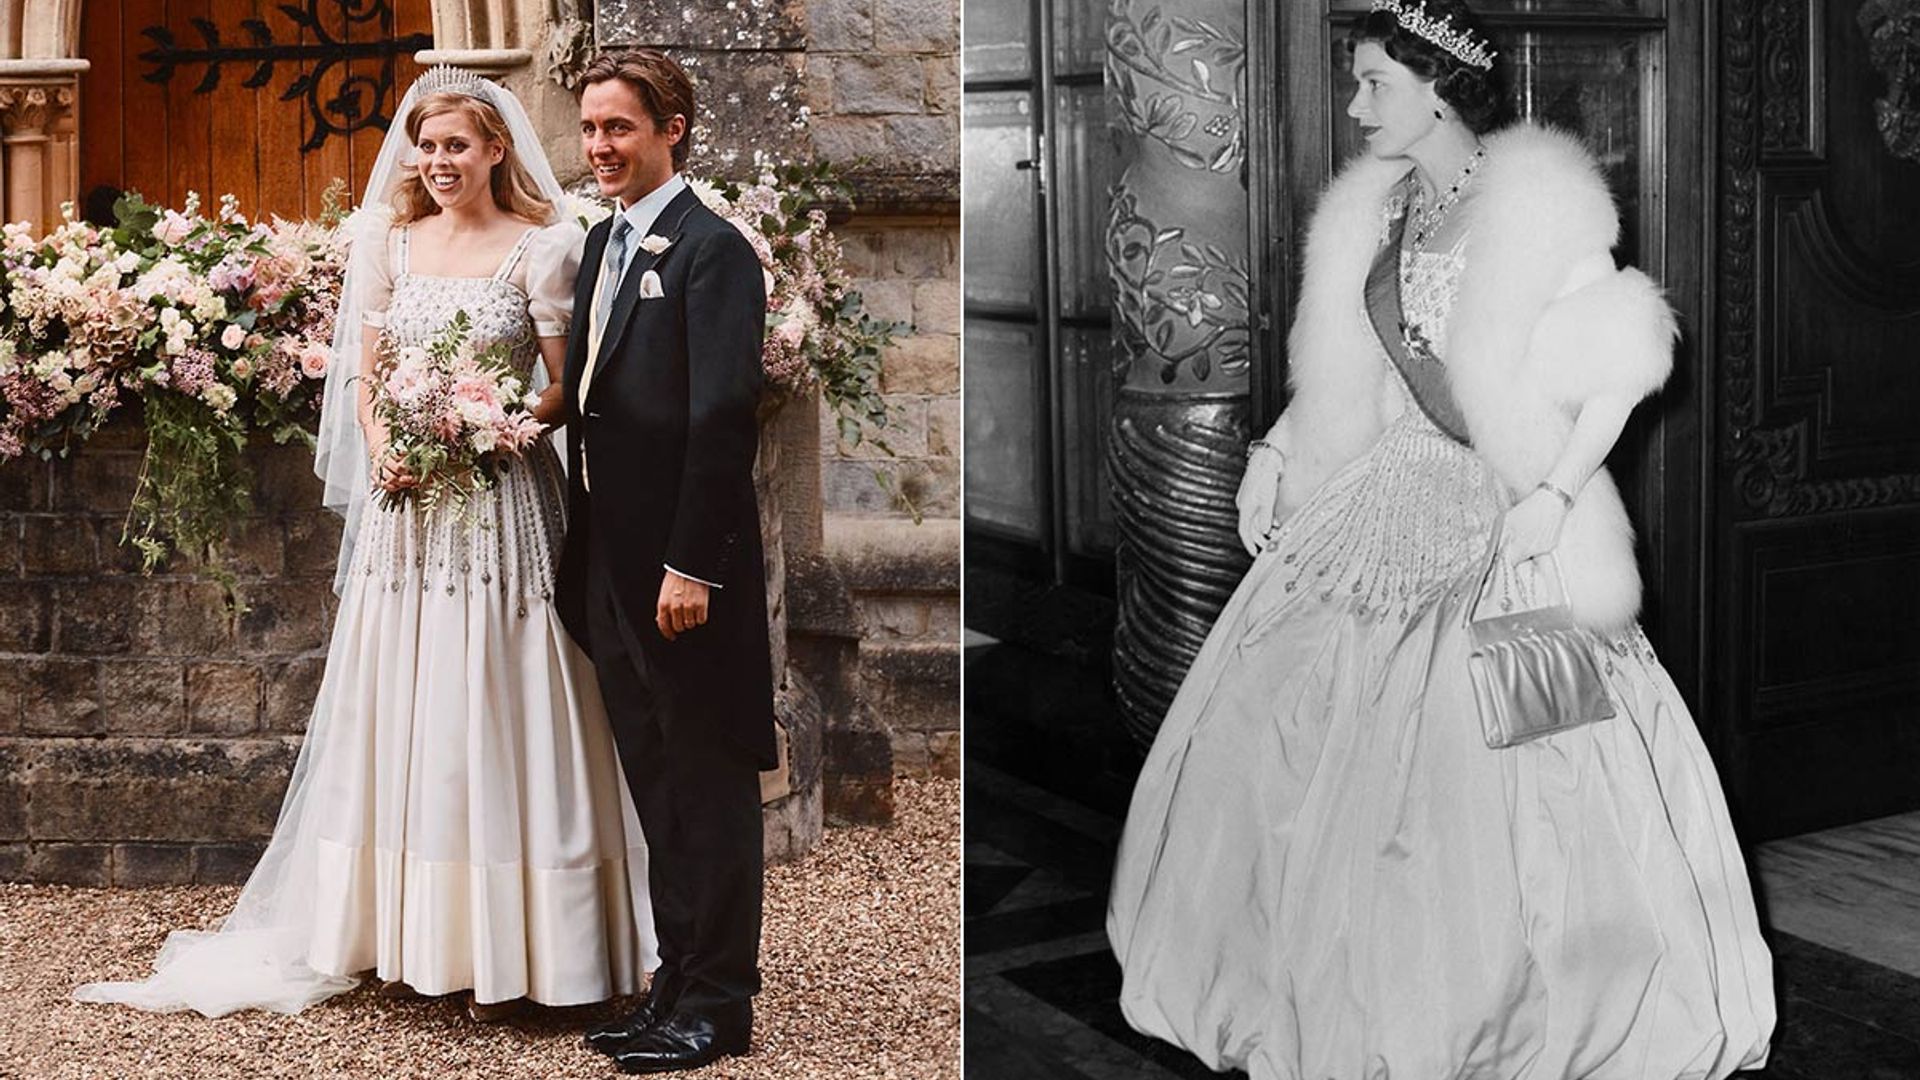 Royal Bride Princess Beatrice Stuns In Vintage Gown Borrowed From The Queen In Official Pictures